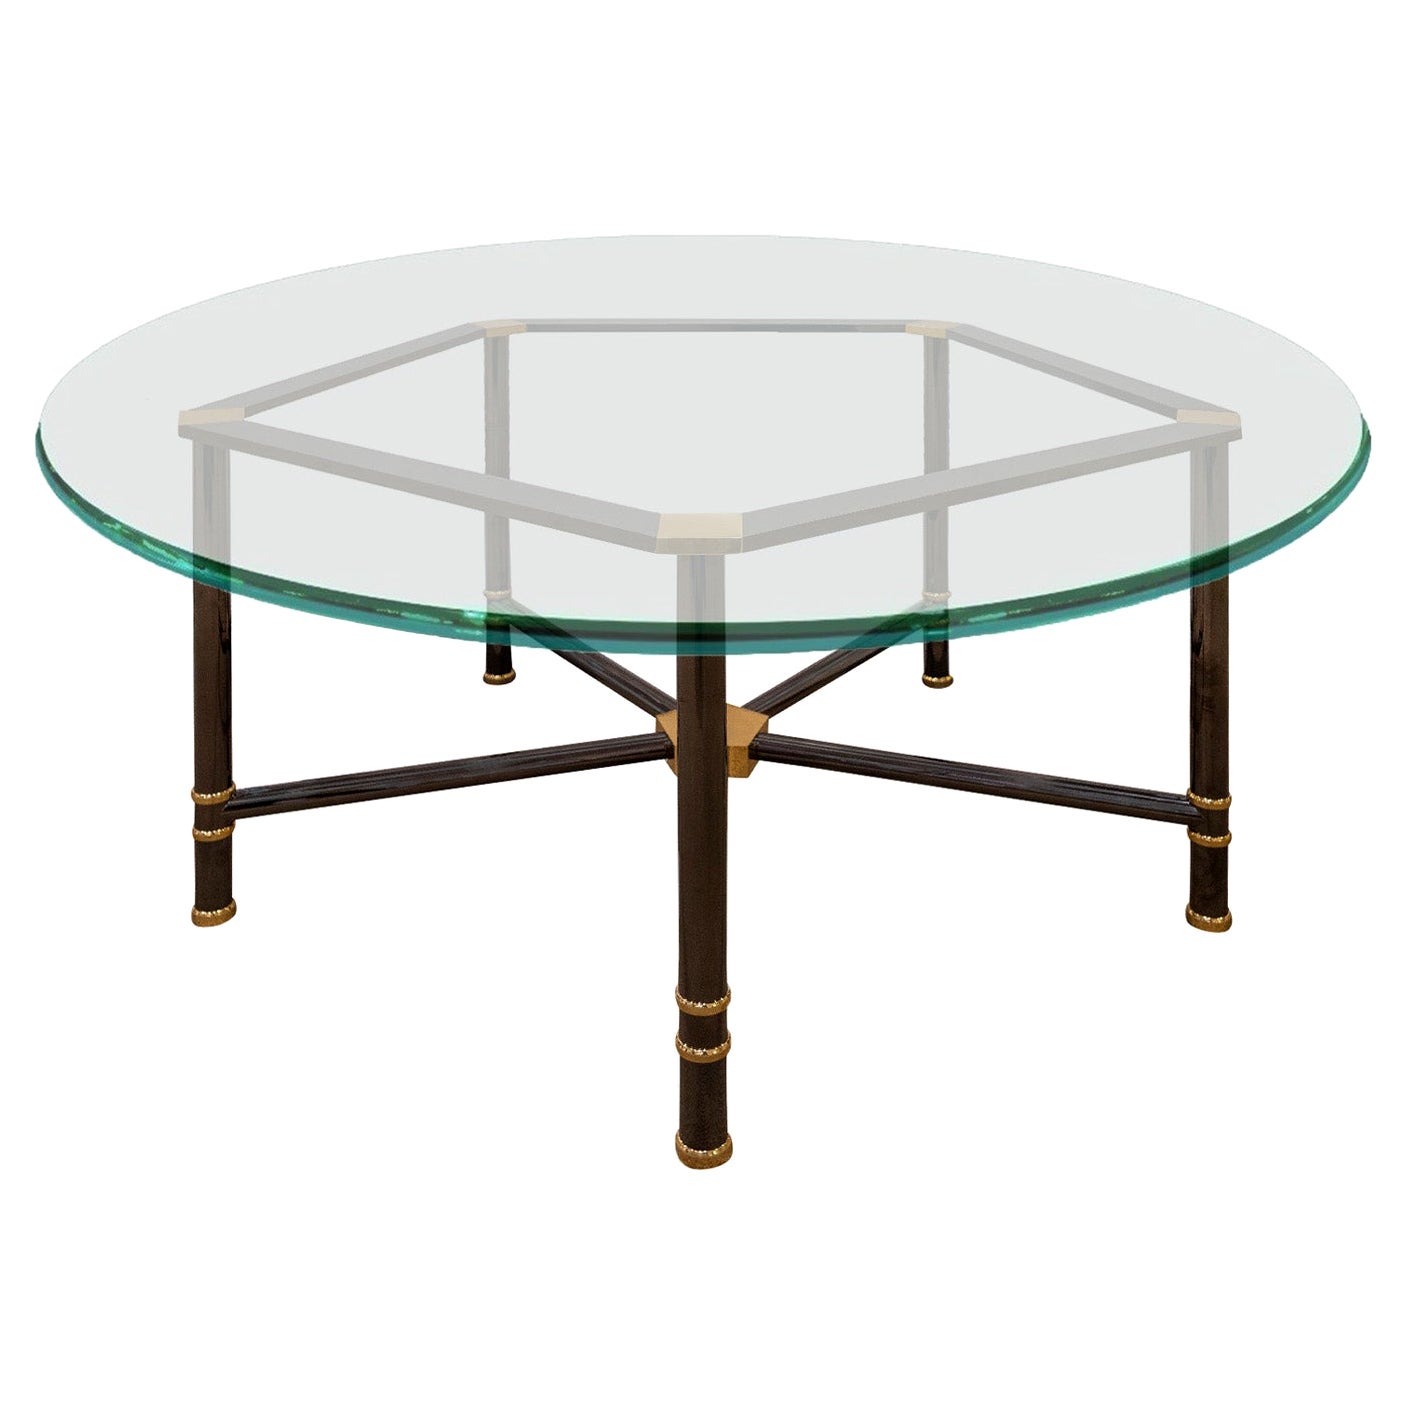 Karl Springer Rare Jansen Style Table in Polished Gunmetal and Brass 1980s For Sale